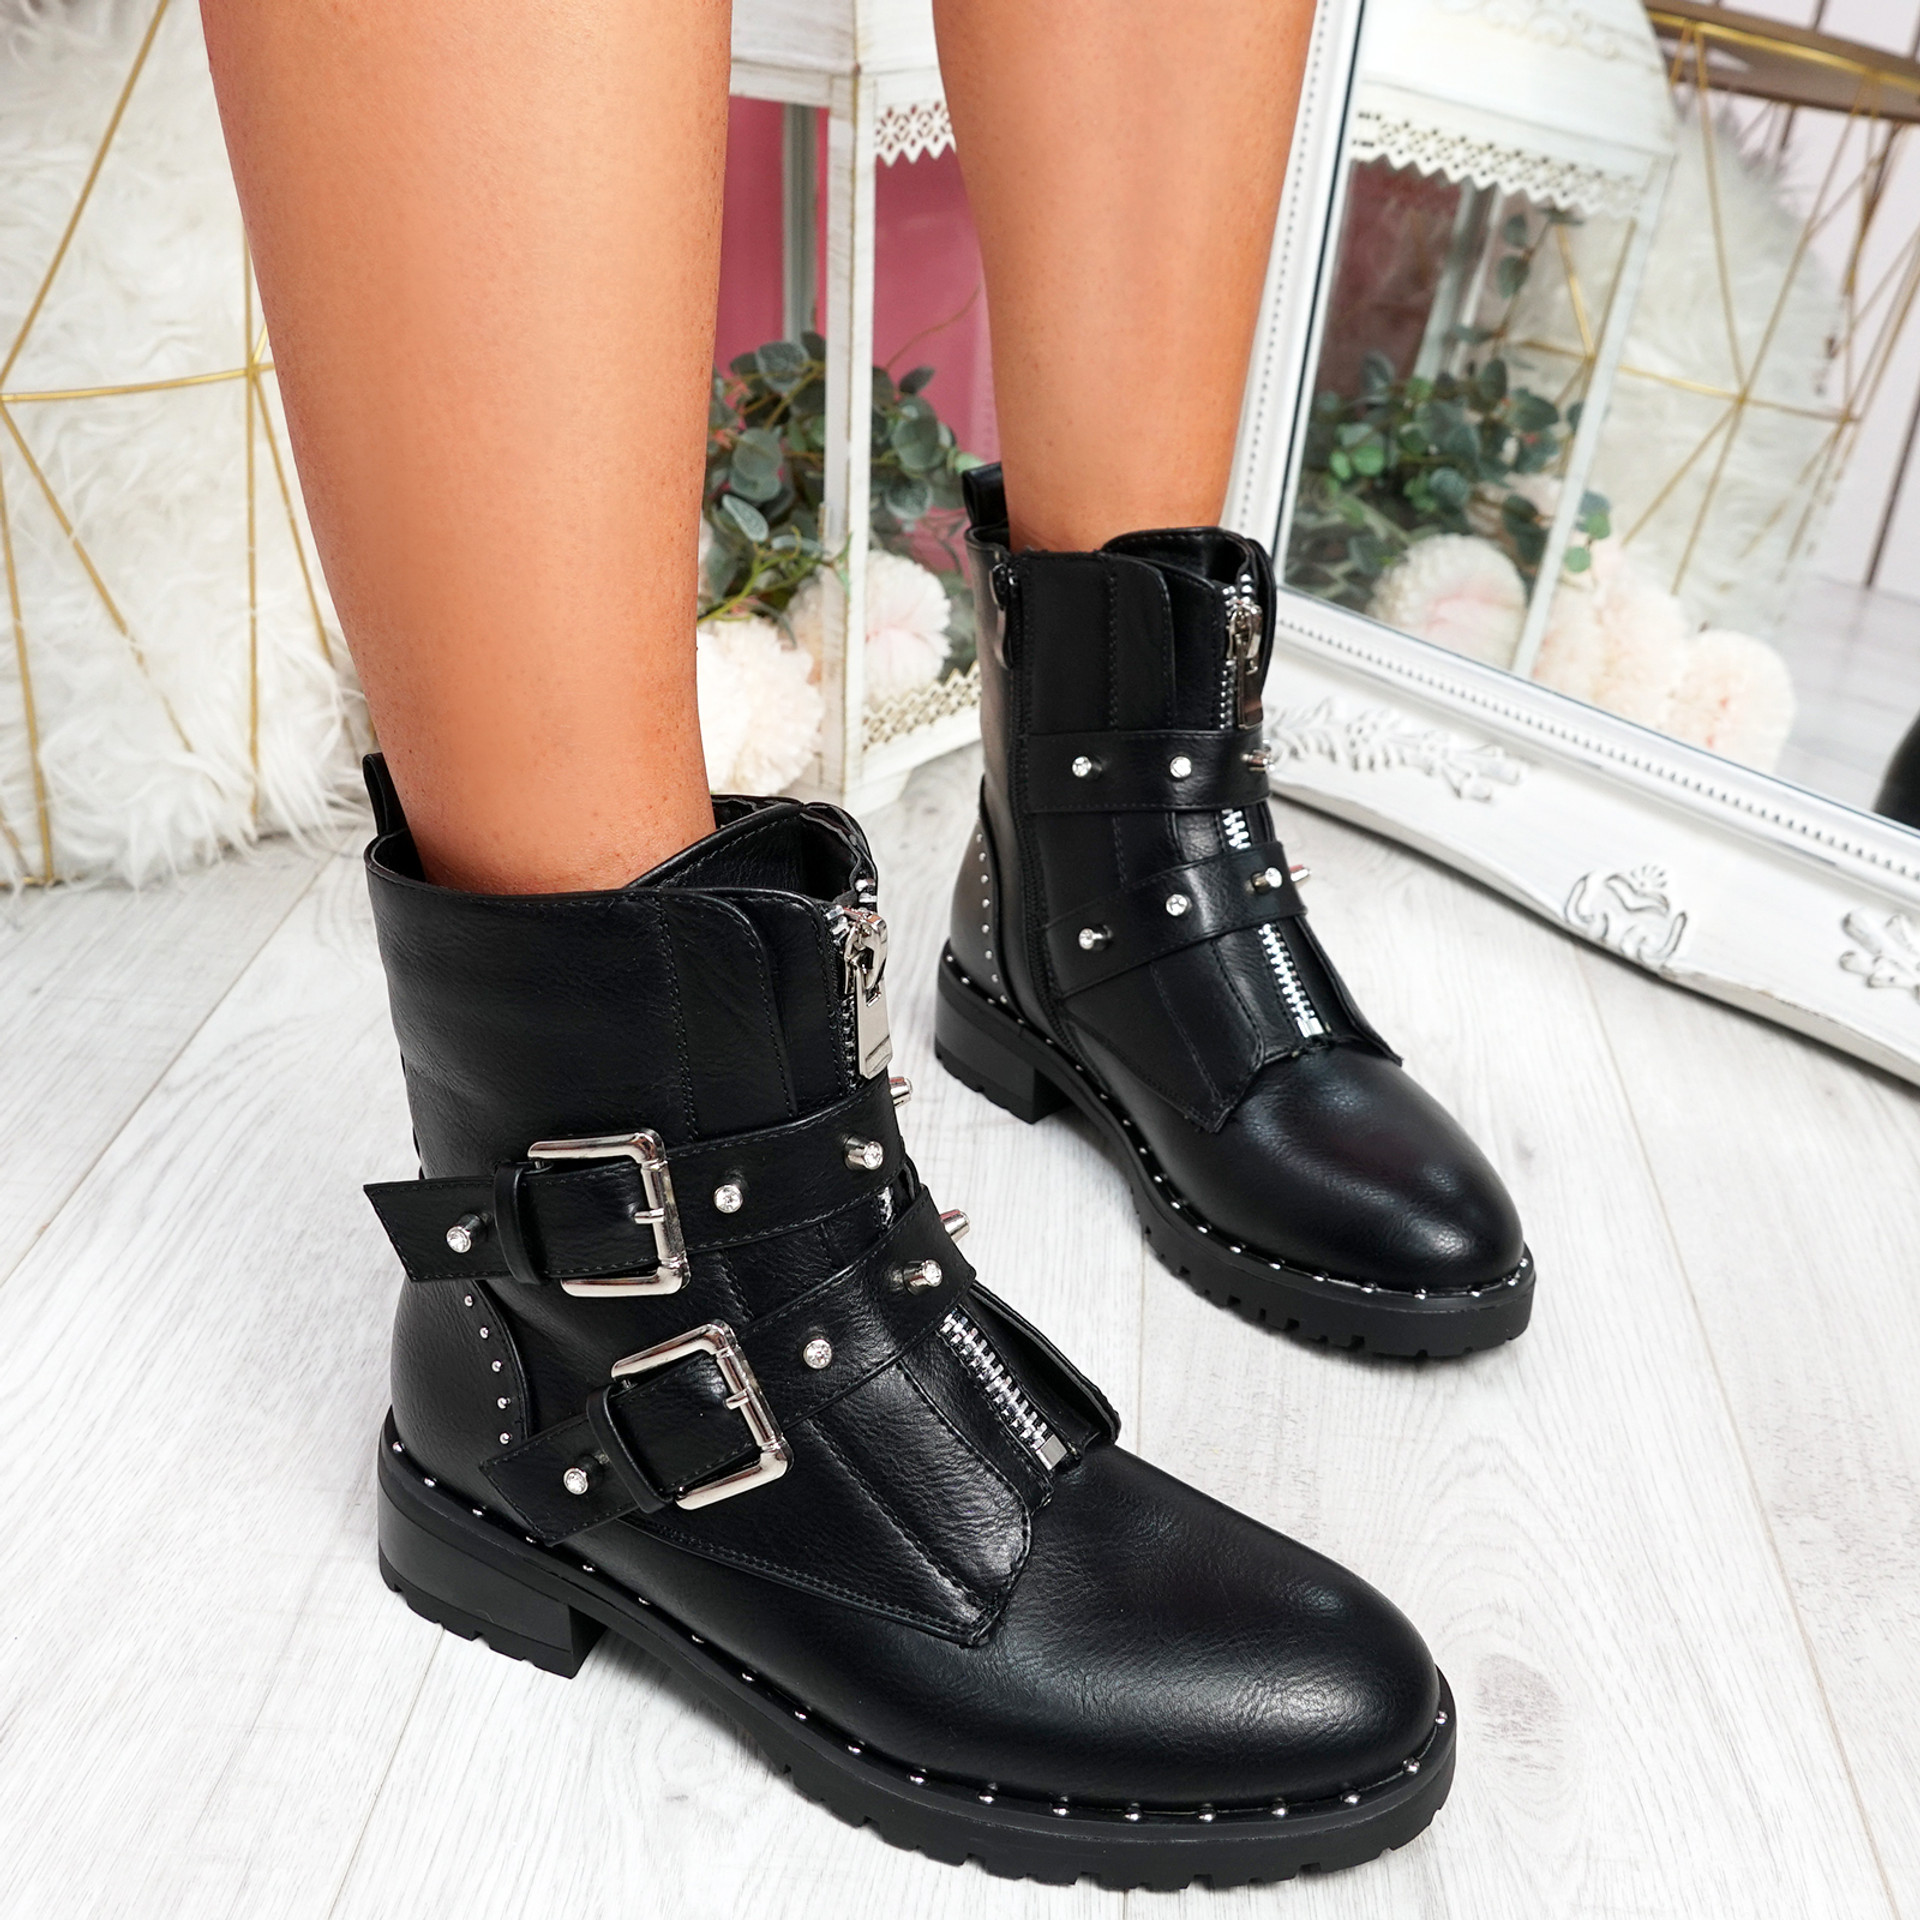 Lunne Black Pu Studded Ankle Boots